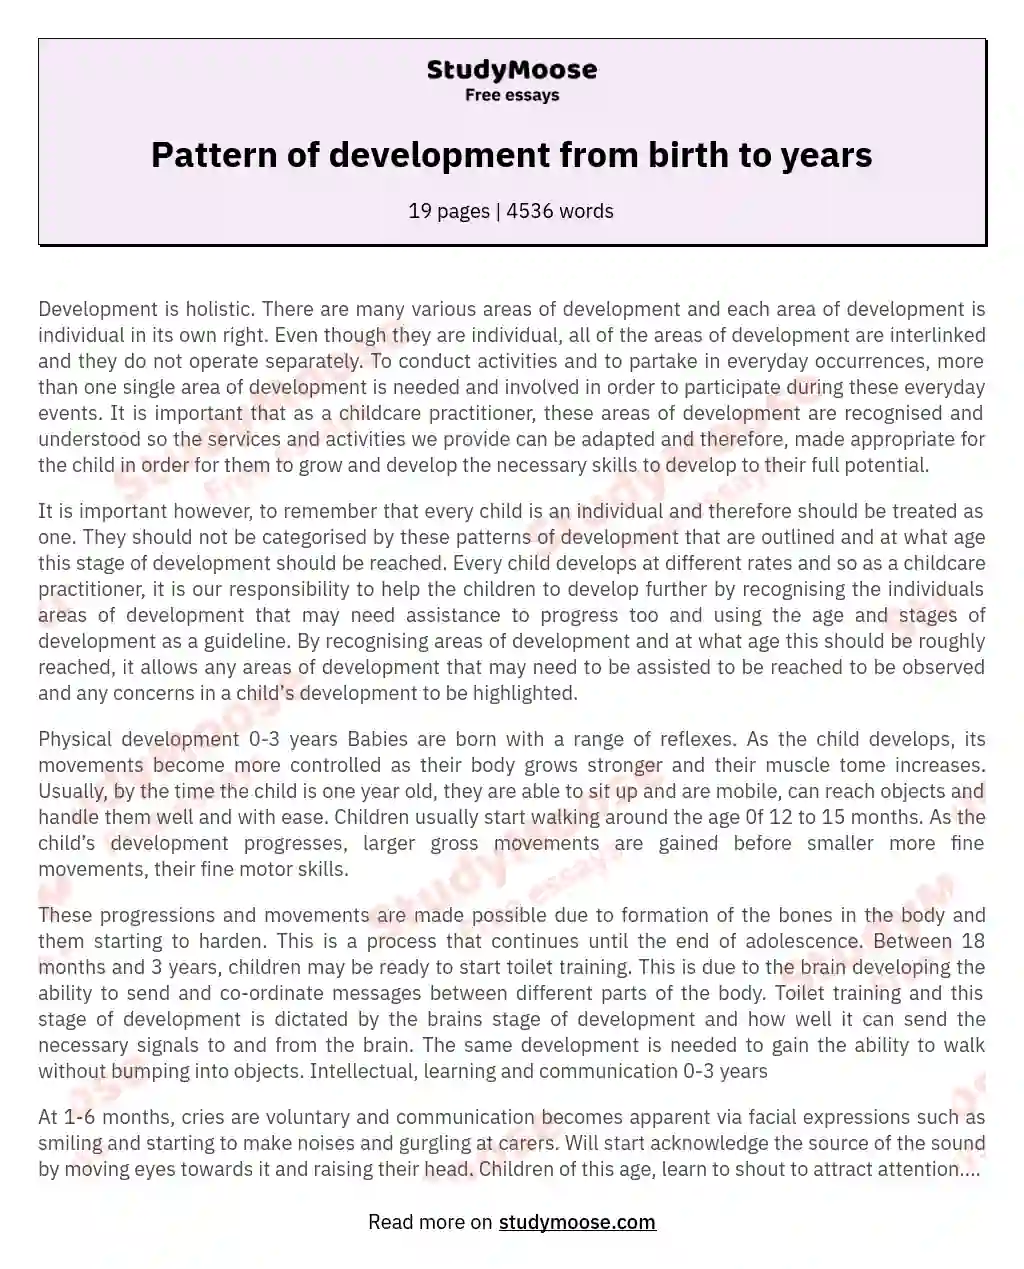 Pattern of development from birth to  years essay